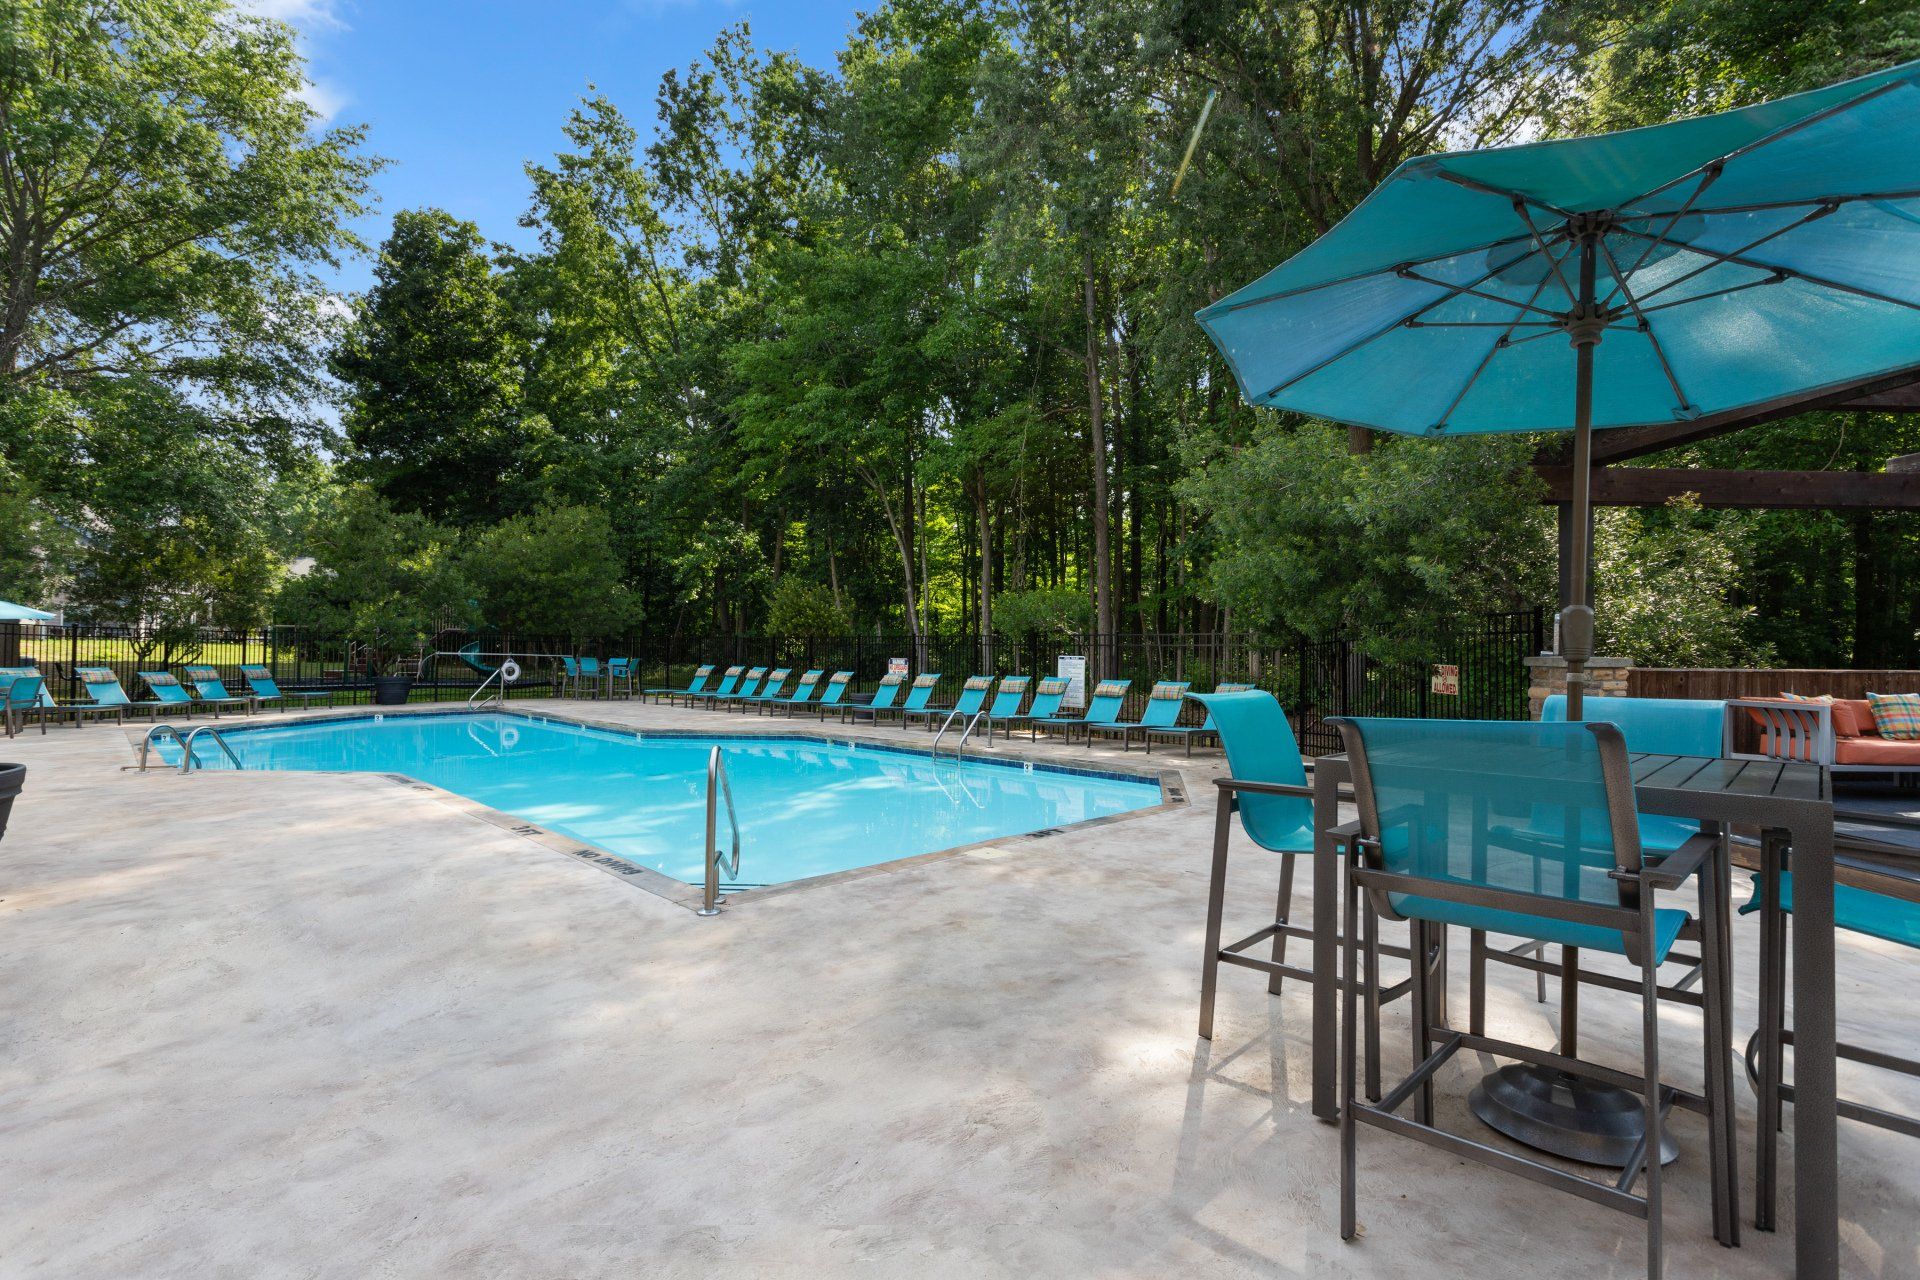 A large swimming pool with a table and chairs under an umbrella Park at Oak Ridge.